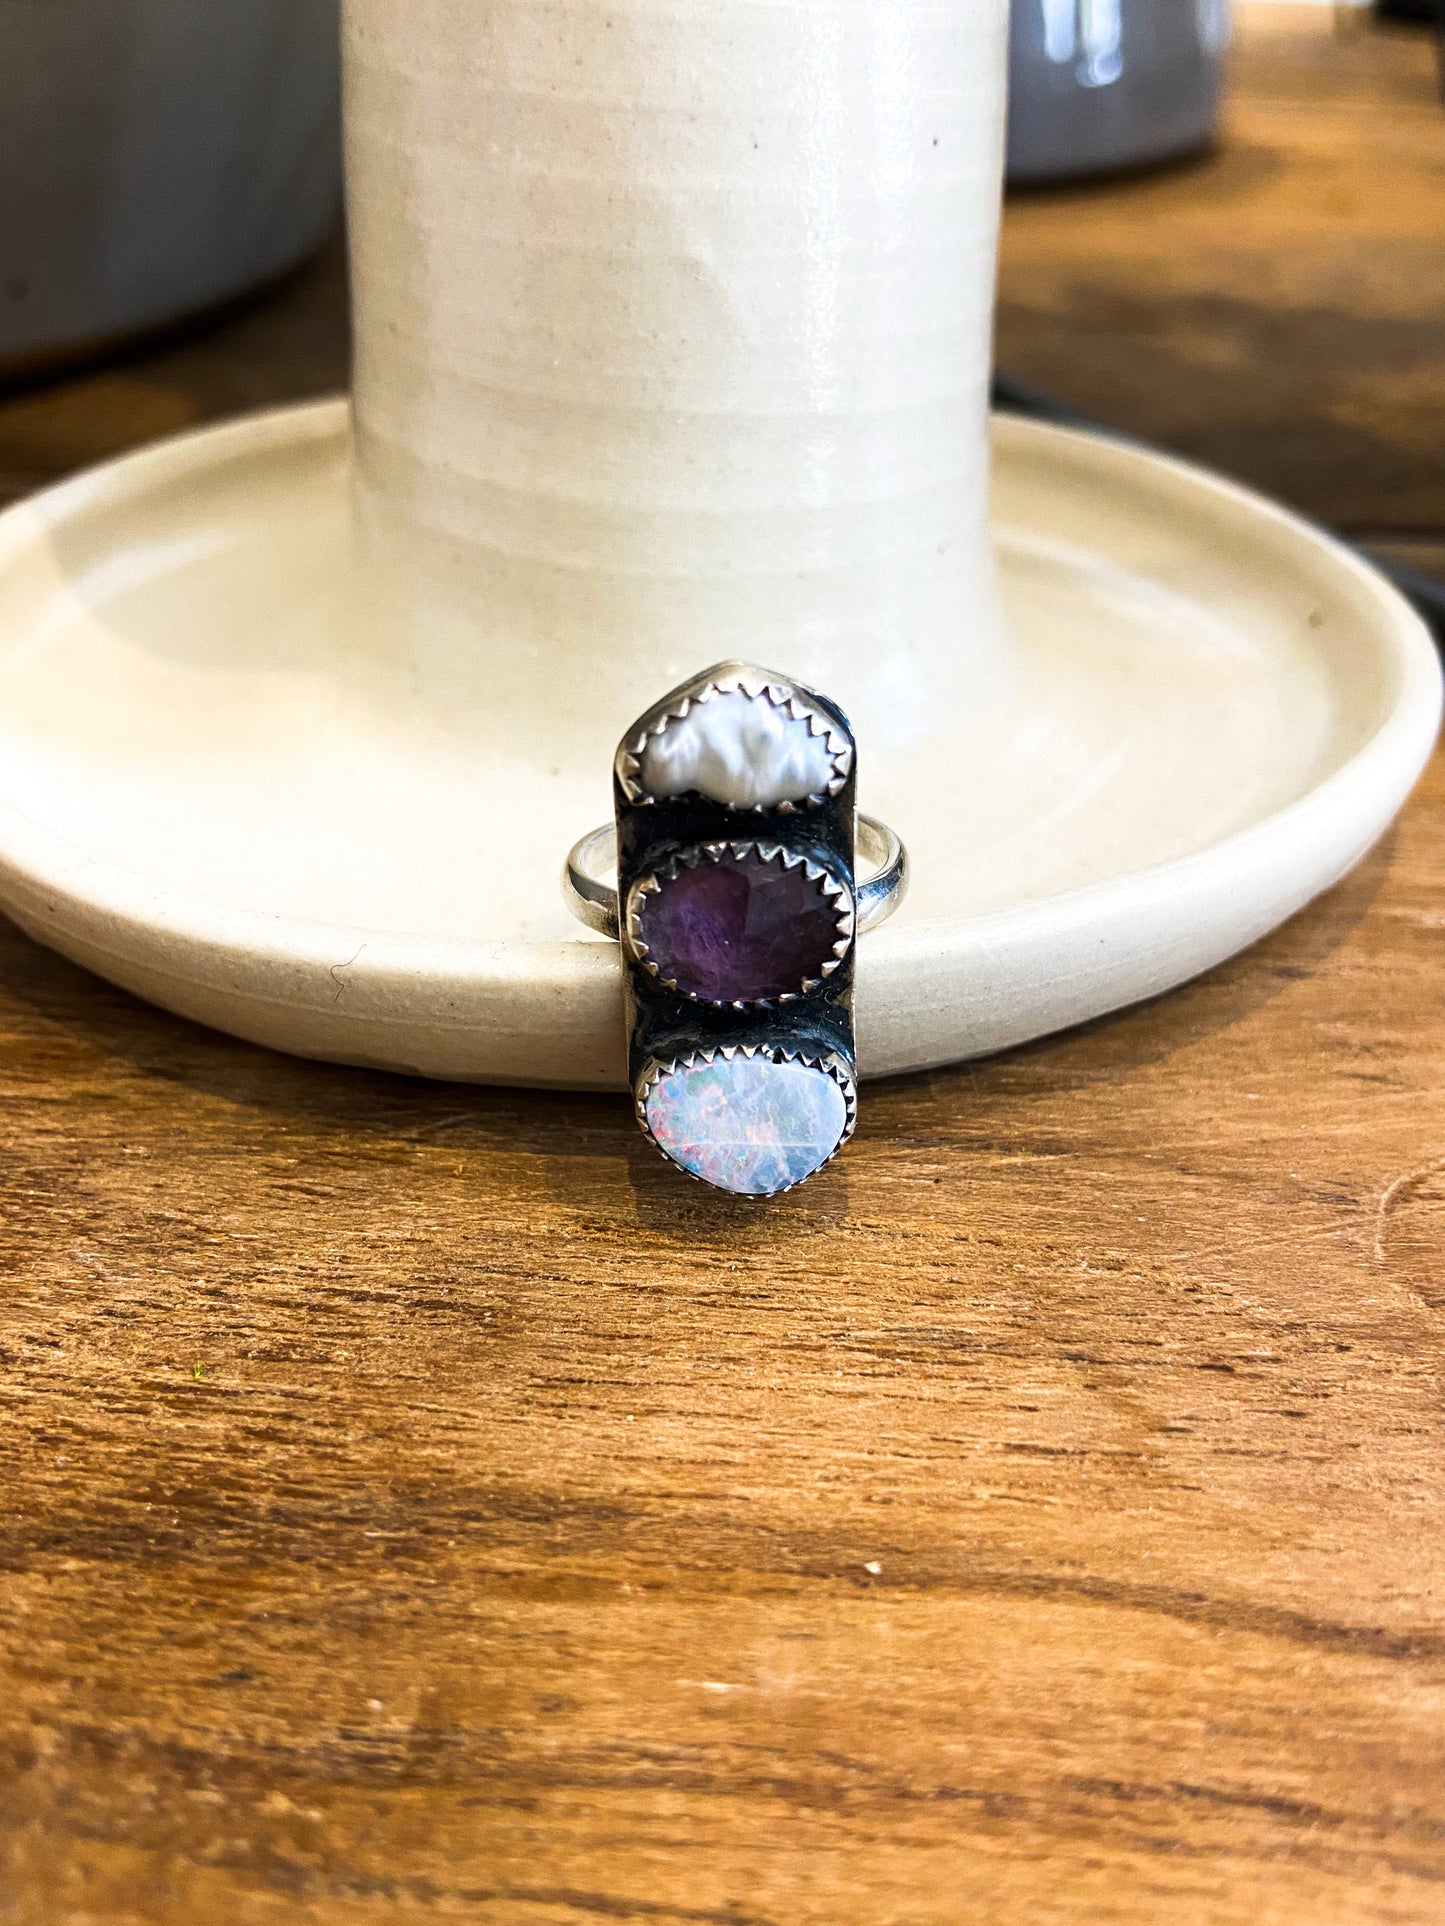 The Opalescent Trio Medallion Ring